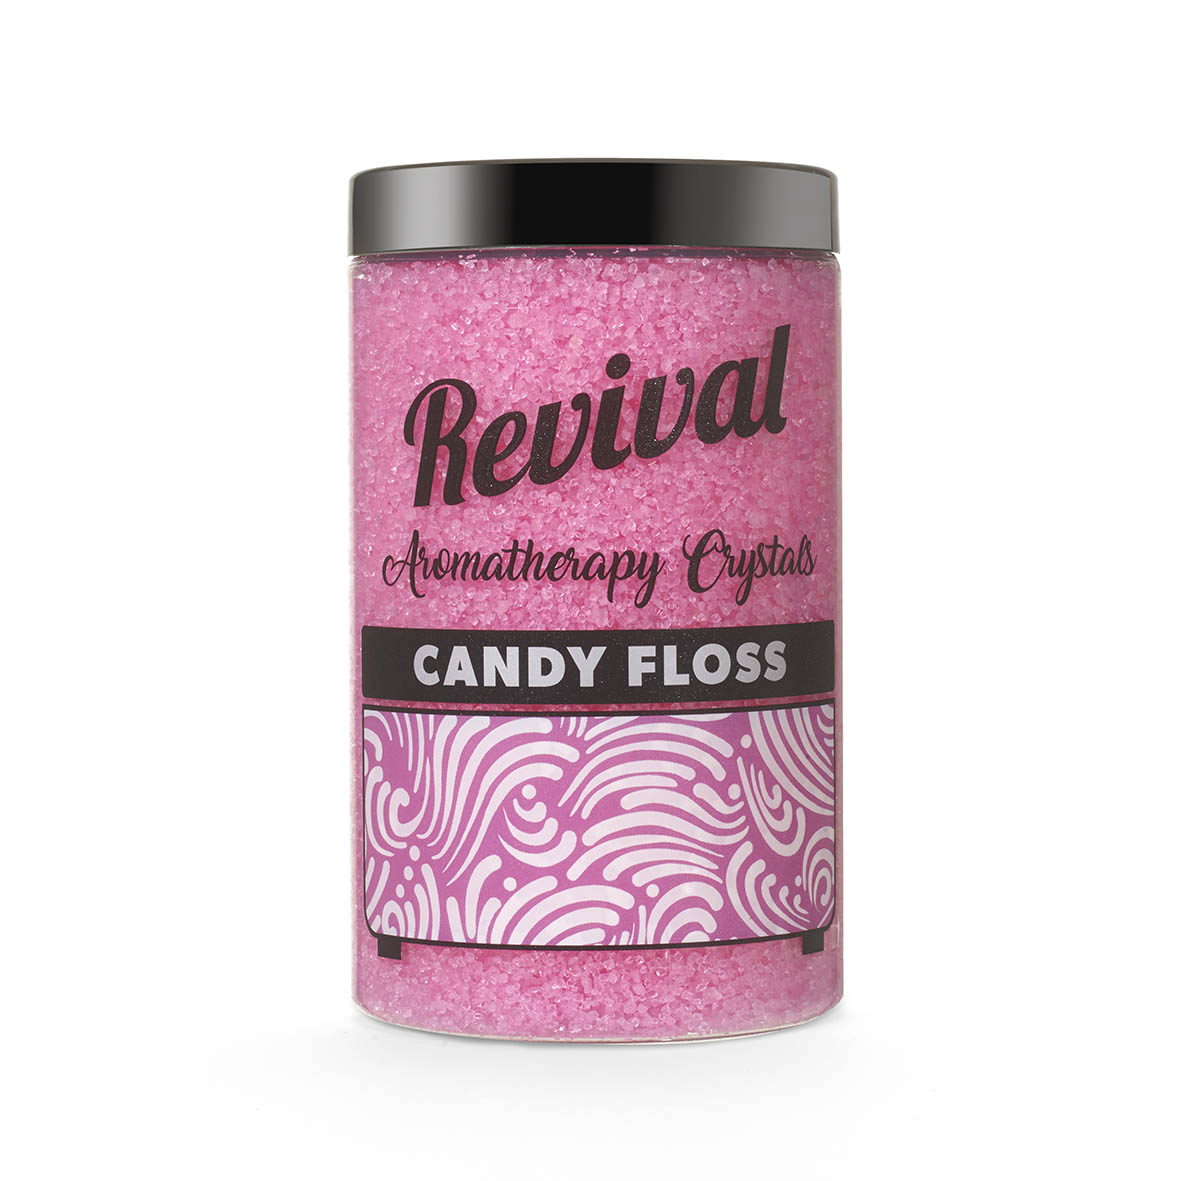 Revival Candy Floss 500g